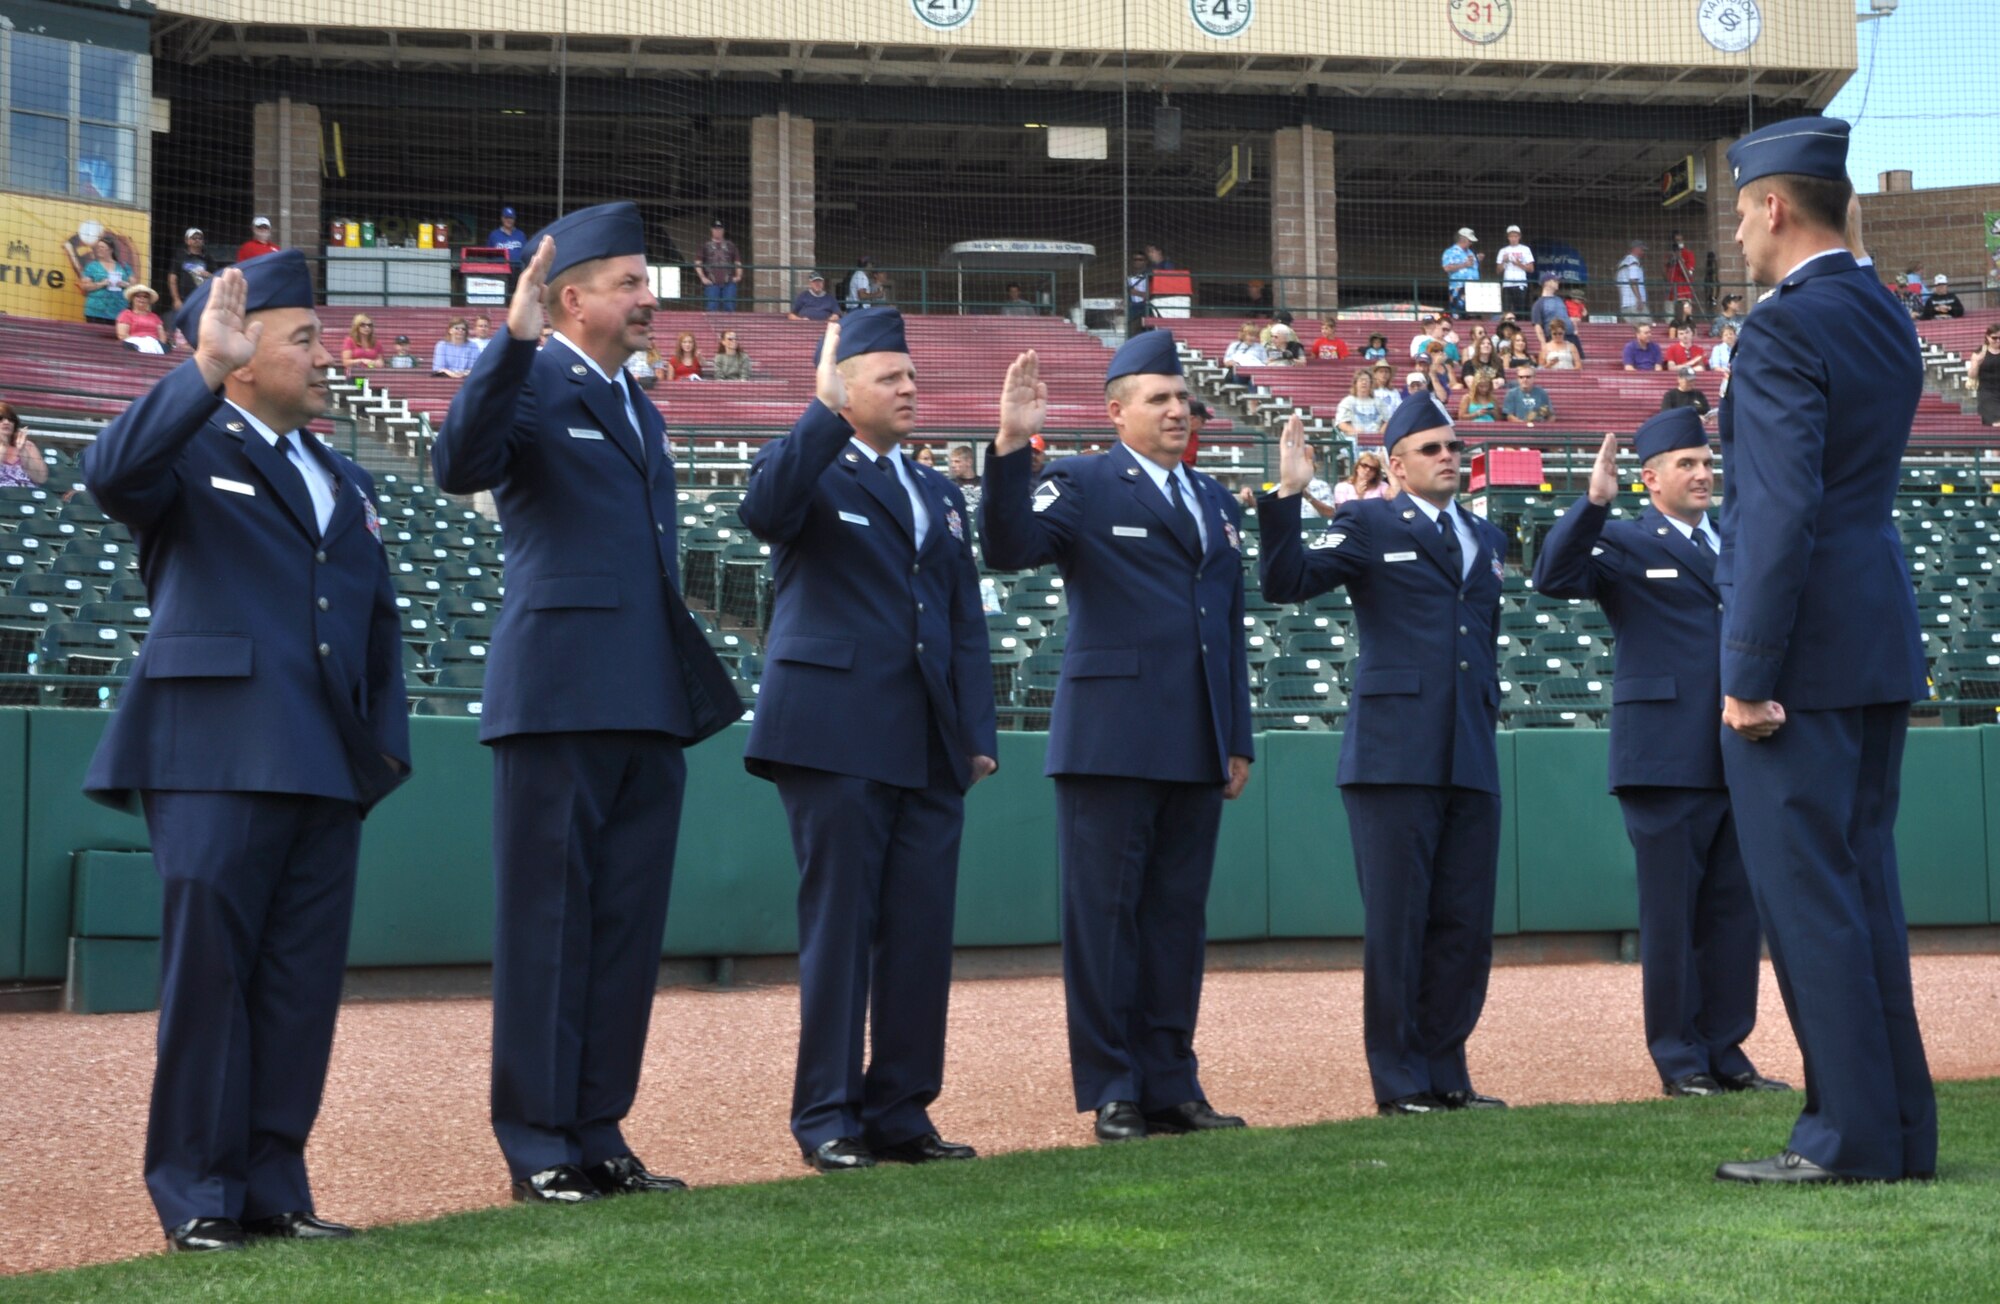 Air Force Reserve and Active Duty Maintenance Airmen recite the oath of enlistment administered by Col. James Van Housen (right) July 10 at Security Service Field in Colorado Springs, Colo. Five of the Airmen, assigned to the 302nd Maintenance Group, and one Airman from the 52nd Airlift Squadron, are based at nearby Peterson Air Force Base. Members of the 302nd MXG, assigned to the AF Reserve's 302nd Airlift Wing, worked with the city's Sky Sox minor league baseball team to re-enlist the six Airmen in front of an estimated 3,000-person crowd. Later that evening, Airman 1st Class Tyler Higgins from the 52nd AS threw out the first pitch against the visiting Reno Aces during the night's doubleheader. Colonel Van Housen is the 302nd MXG commander. (U.S. Air Force photo/Staff Sgt. Stephen J. Collier)